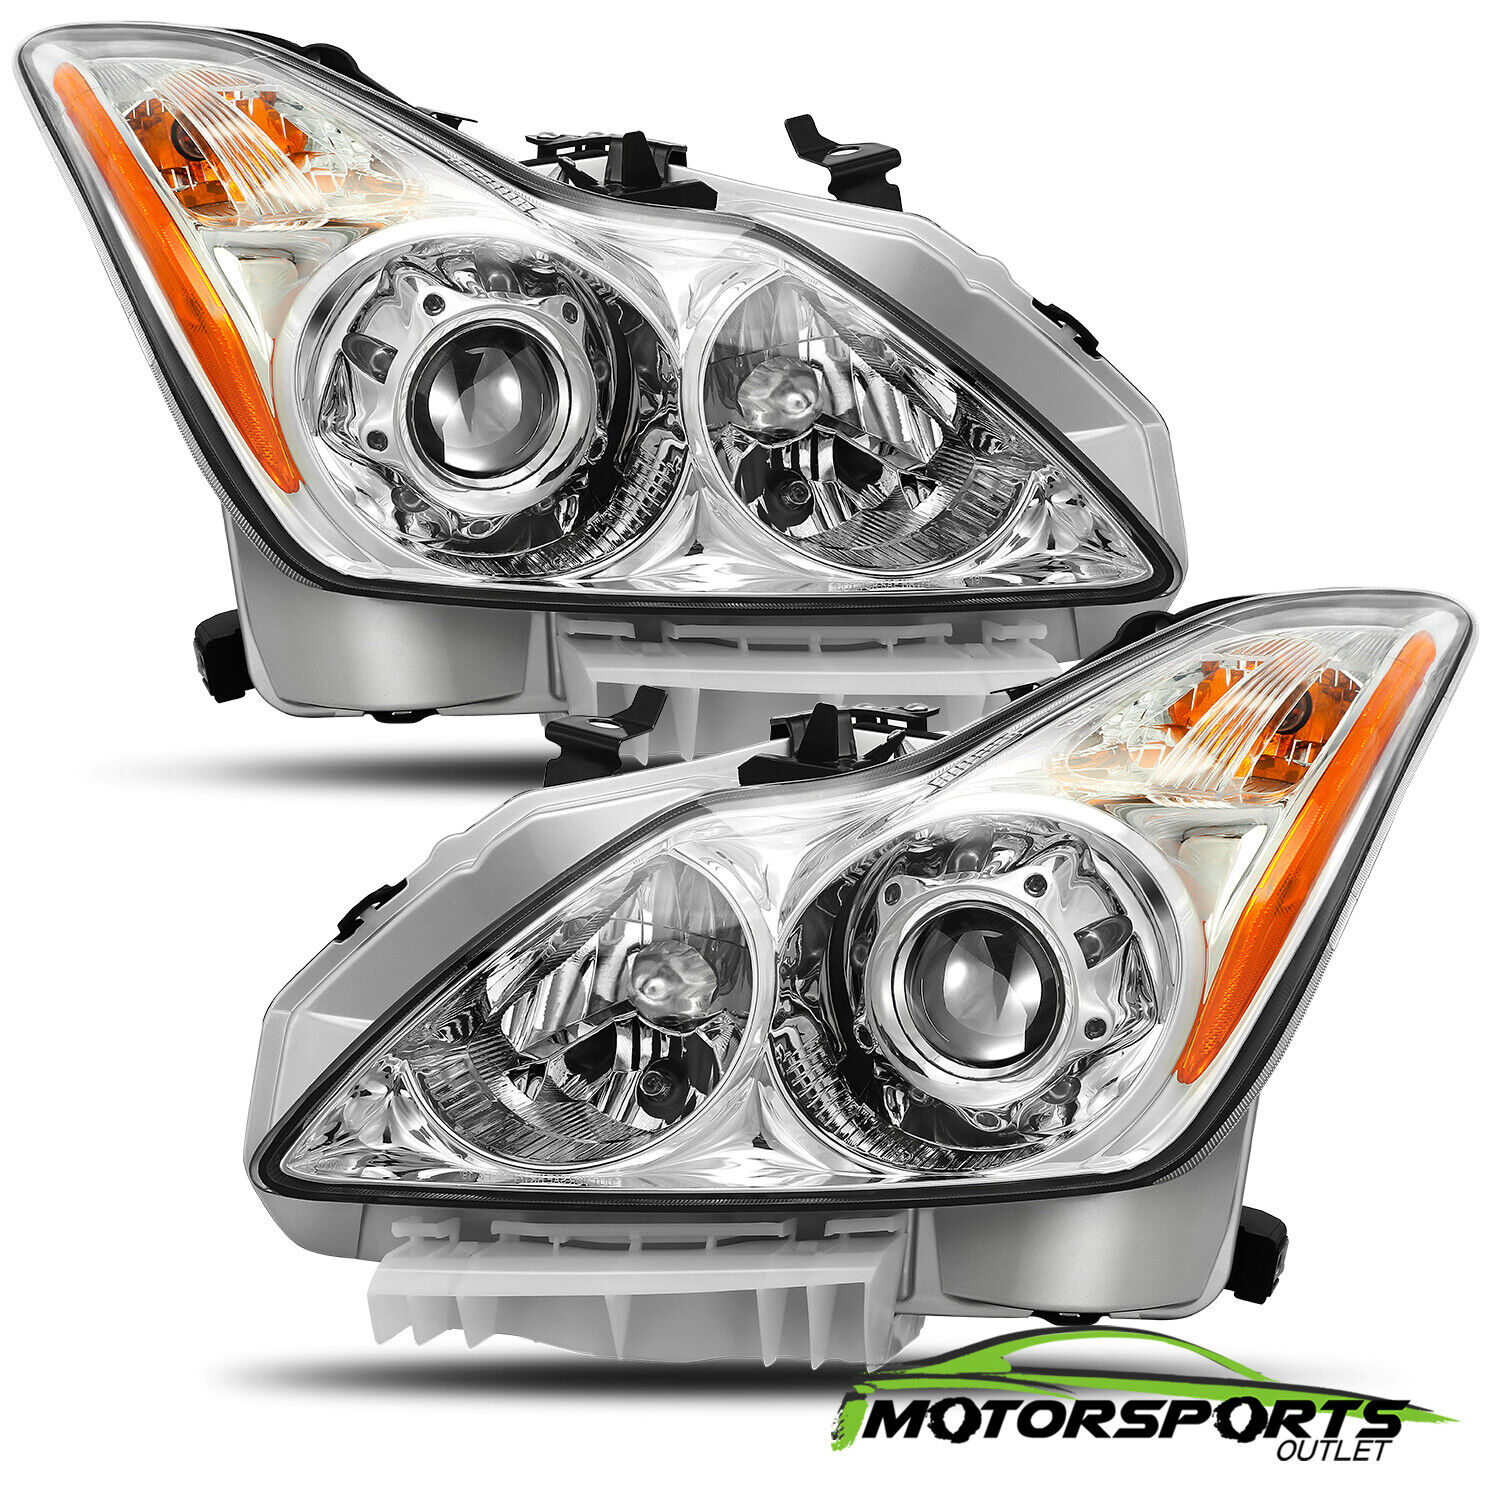 For 2008-2015 Infiniti G37/Q60 Coupe Factory Style Chrome Headlights Pair